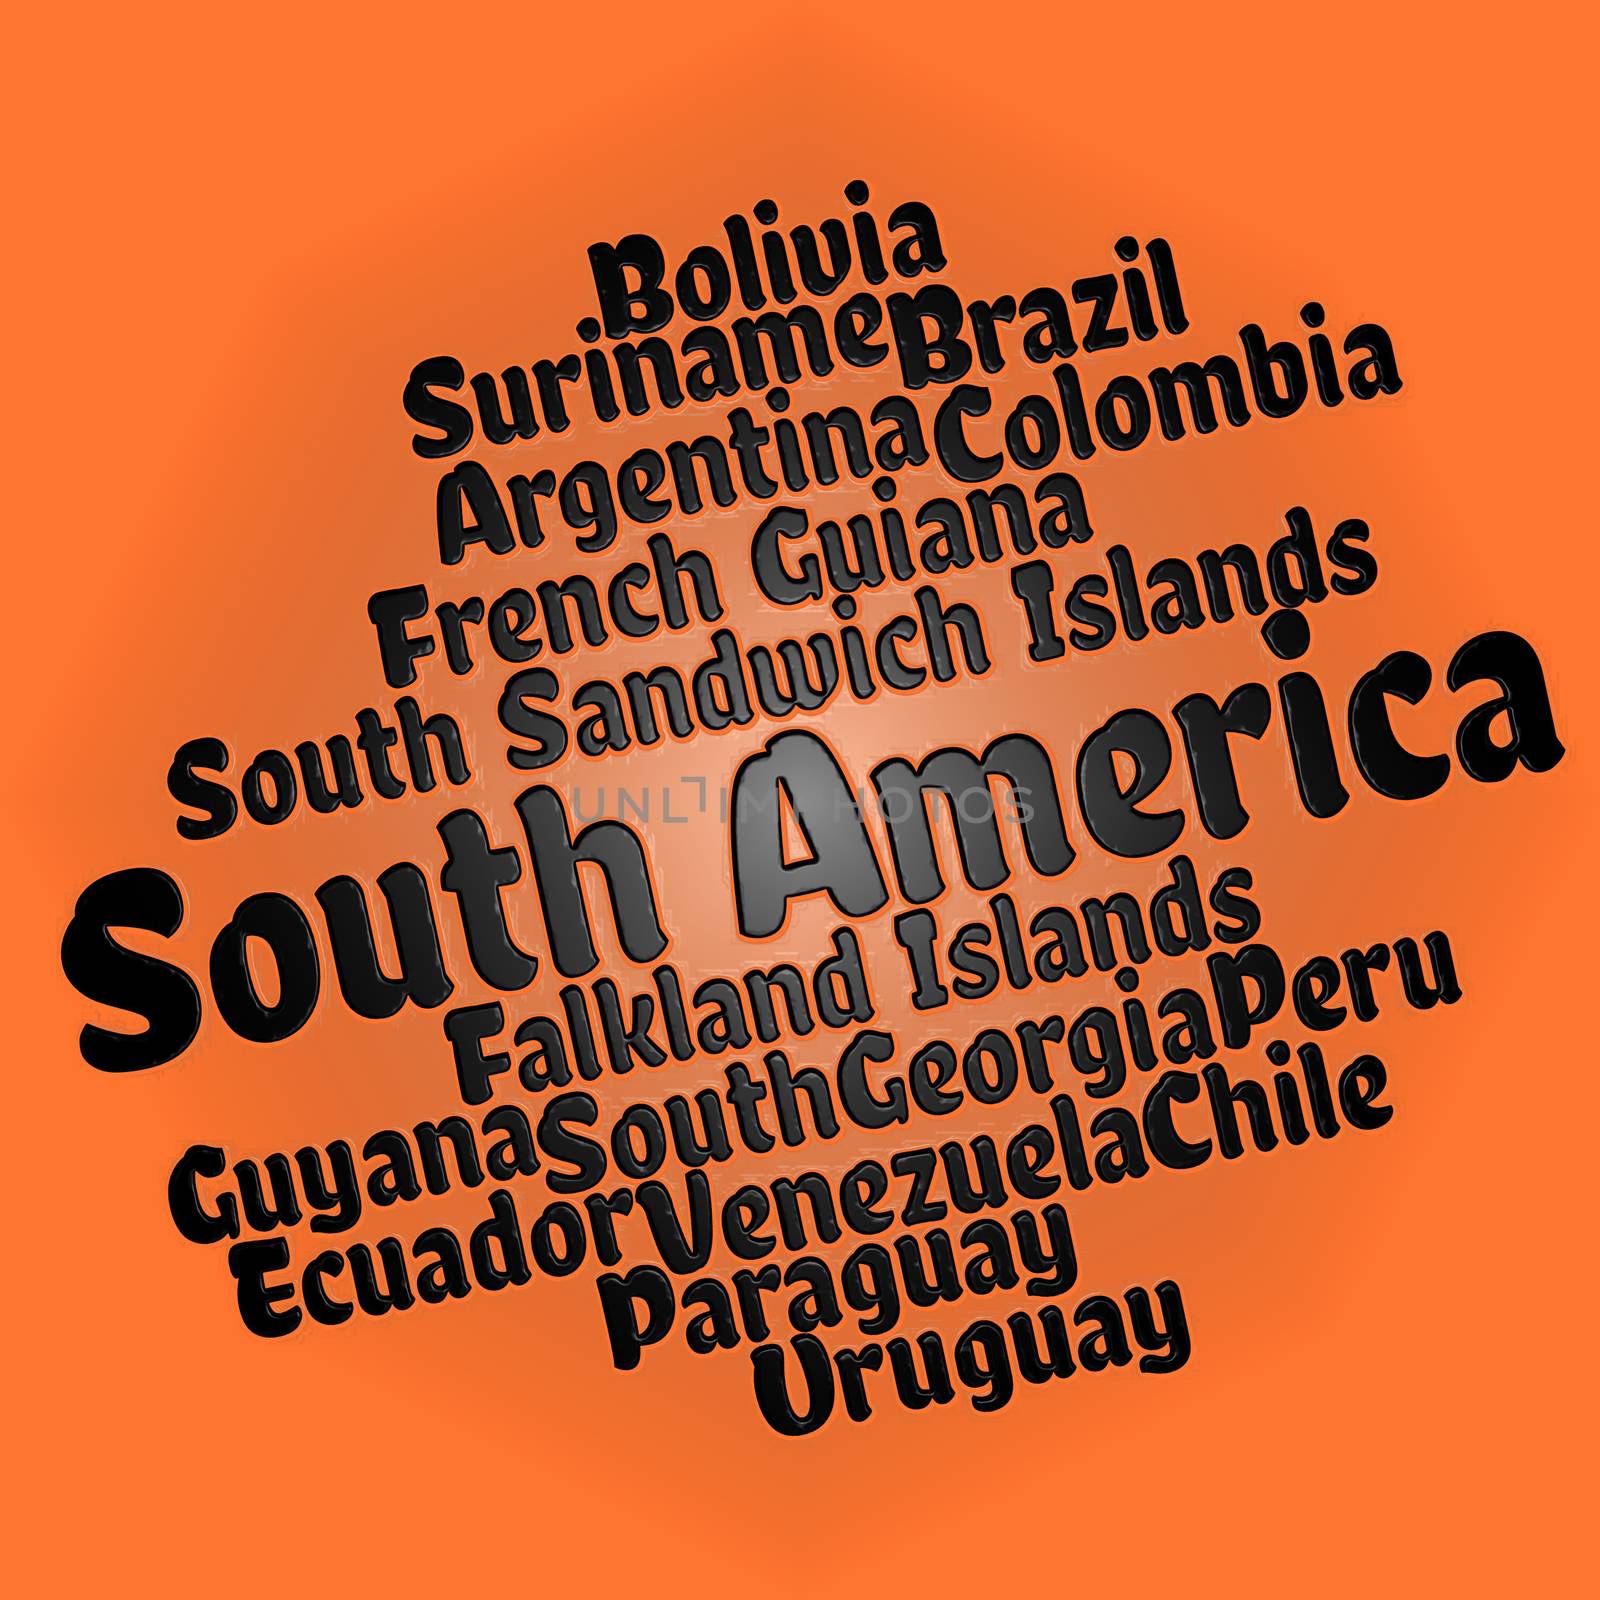 South American countries word cloud